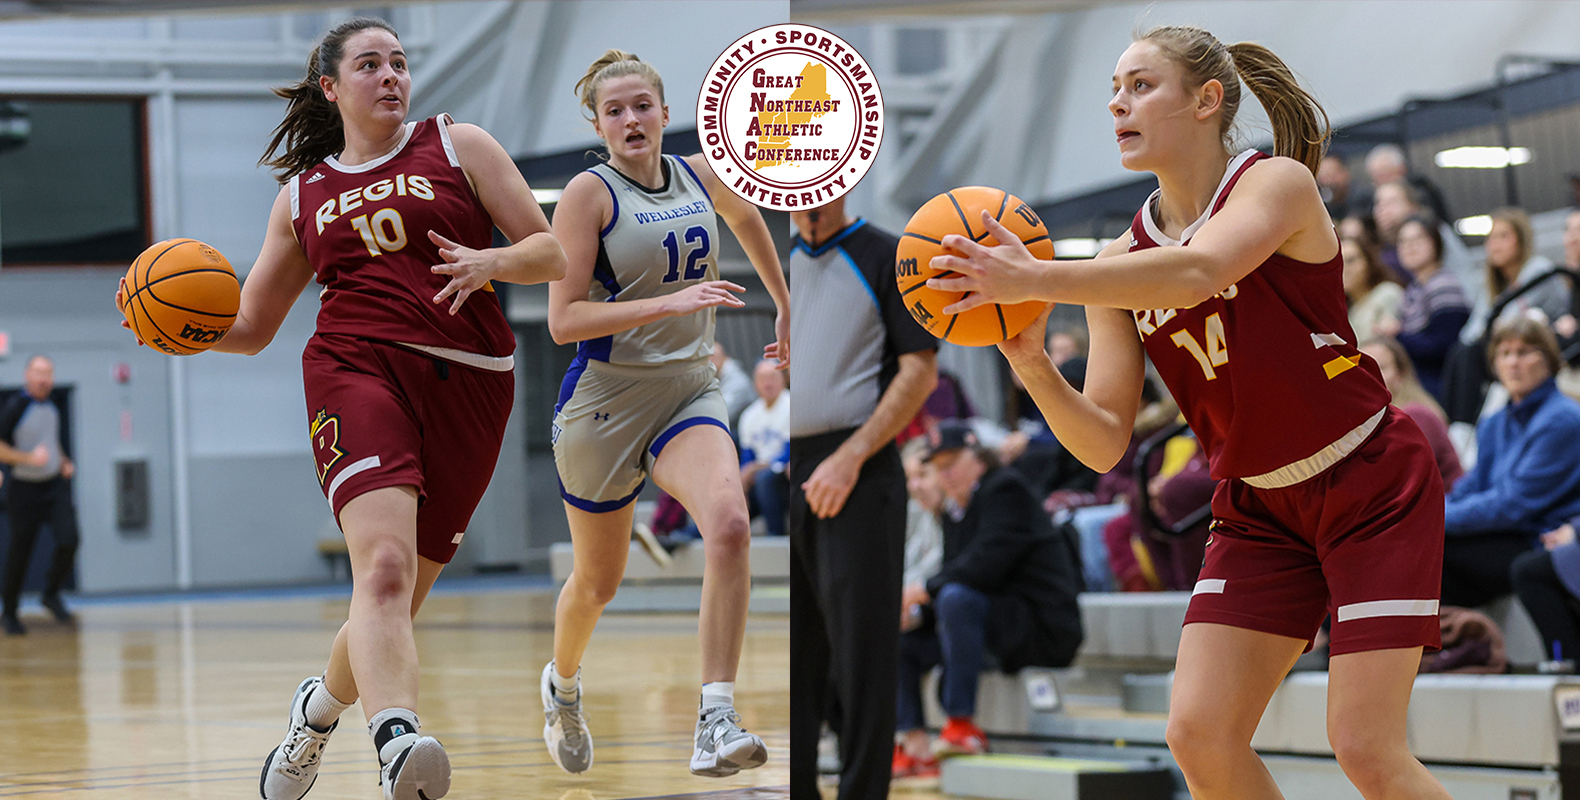 Zancan Selected Second Team All-GNAC, Doherty on All-Sportsmanship Team